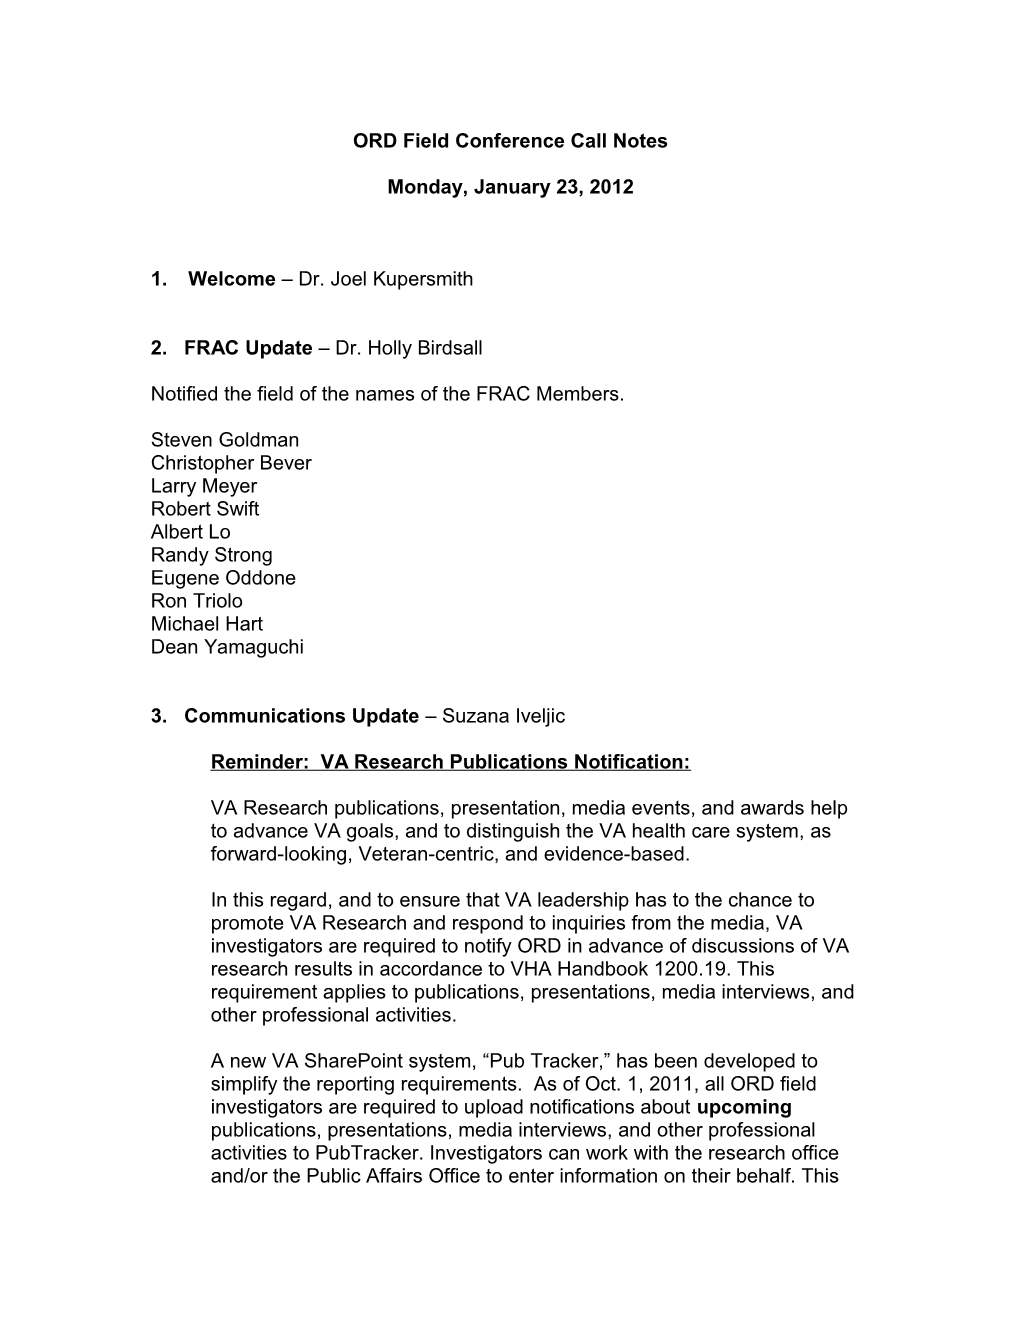 ORD Field Conference Call Notes: January 23, 2012